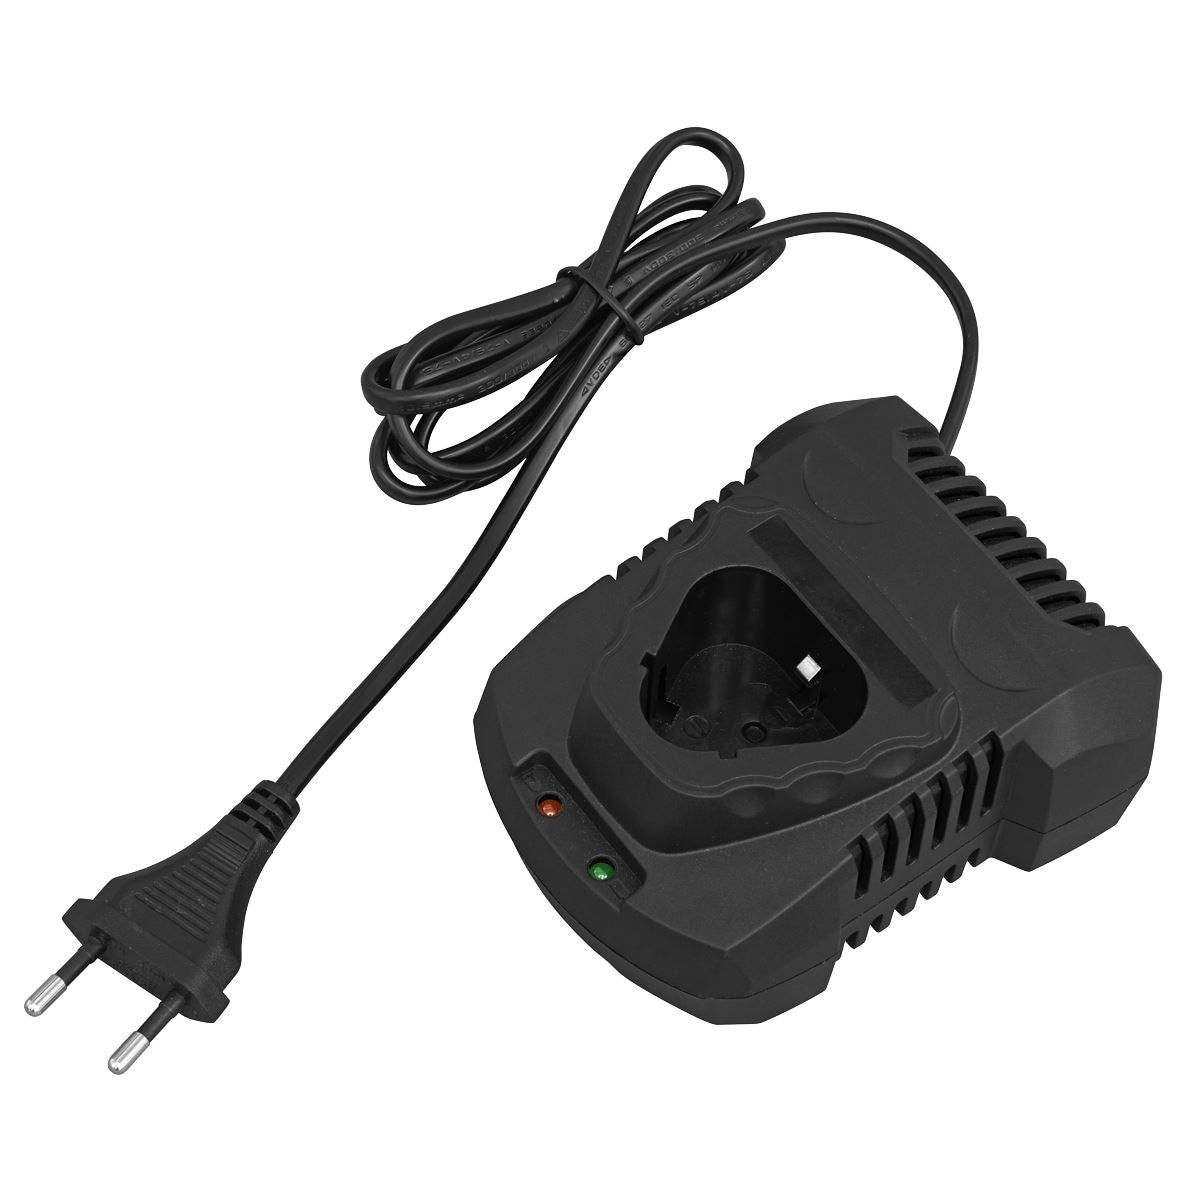 Sealey Battery Charger for 10.8V Lithium-ion SV10.8 Series - European Plug